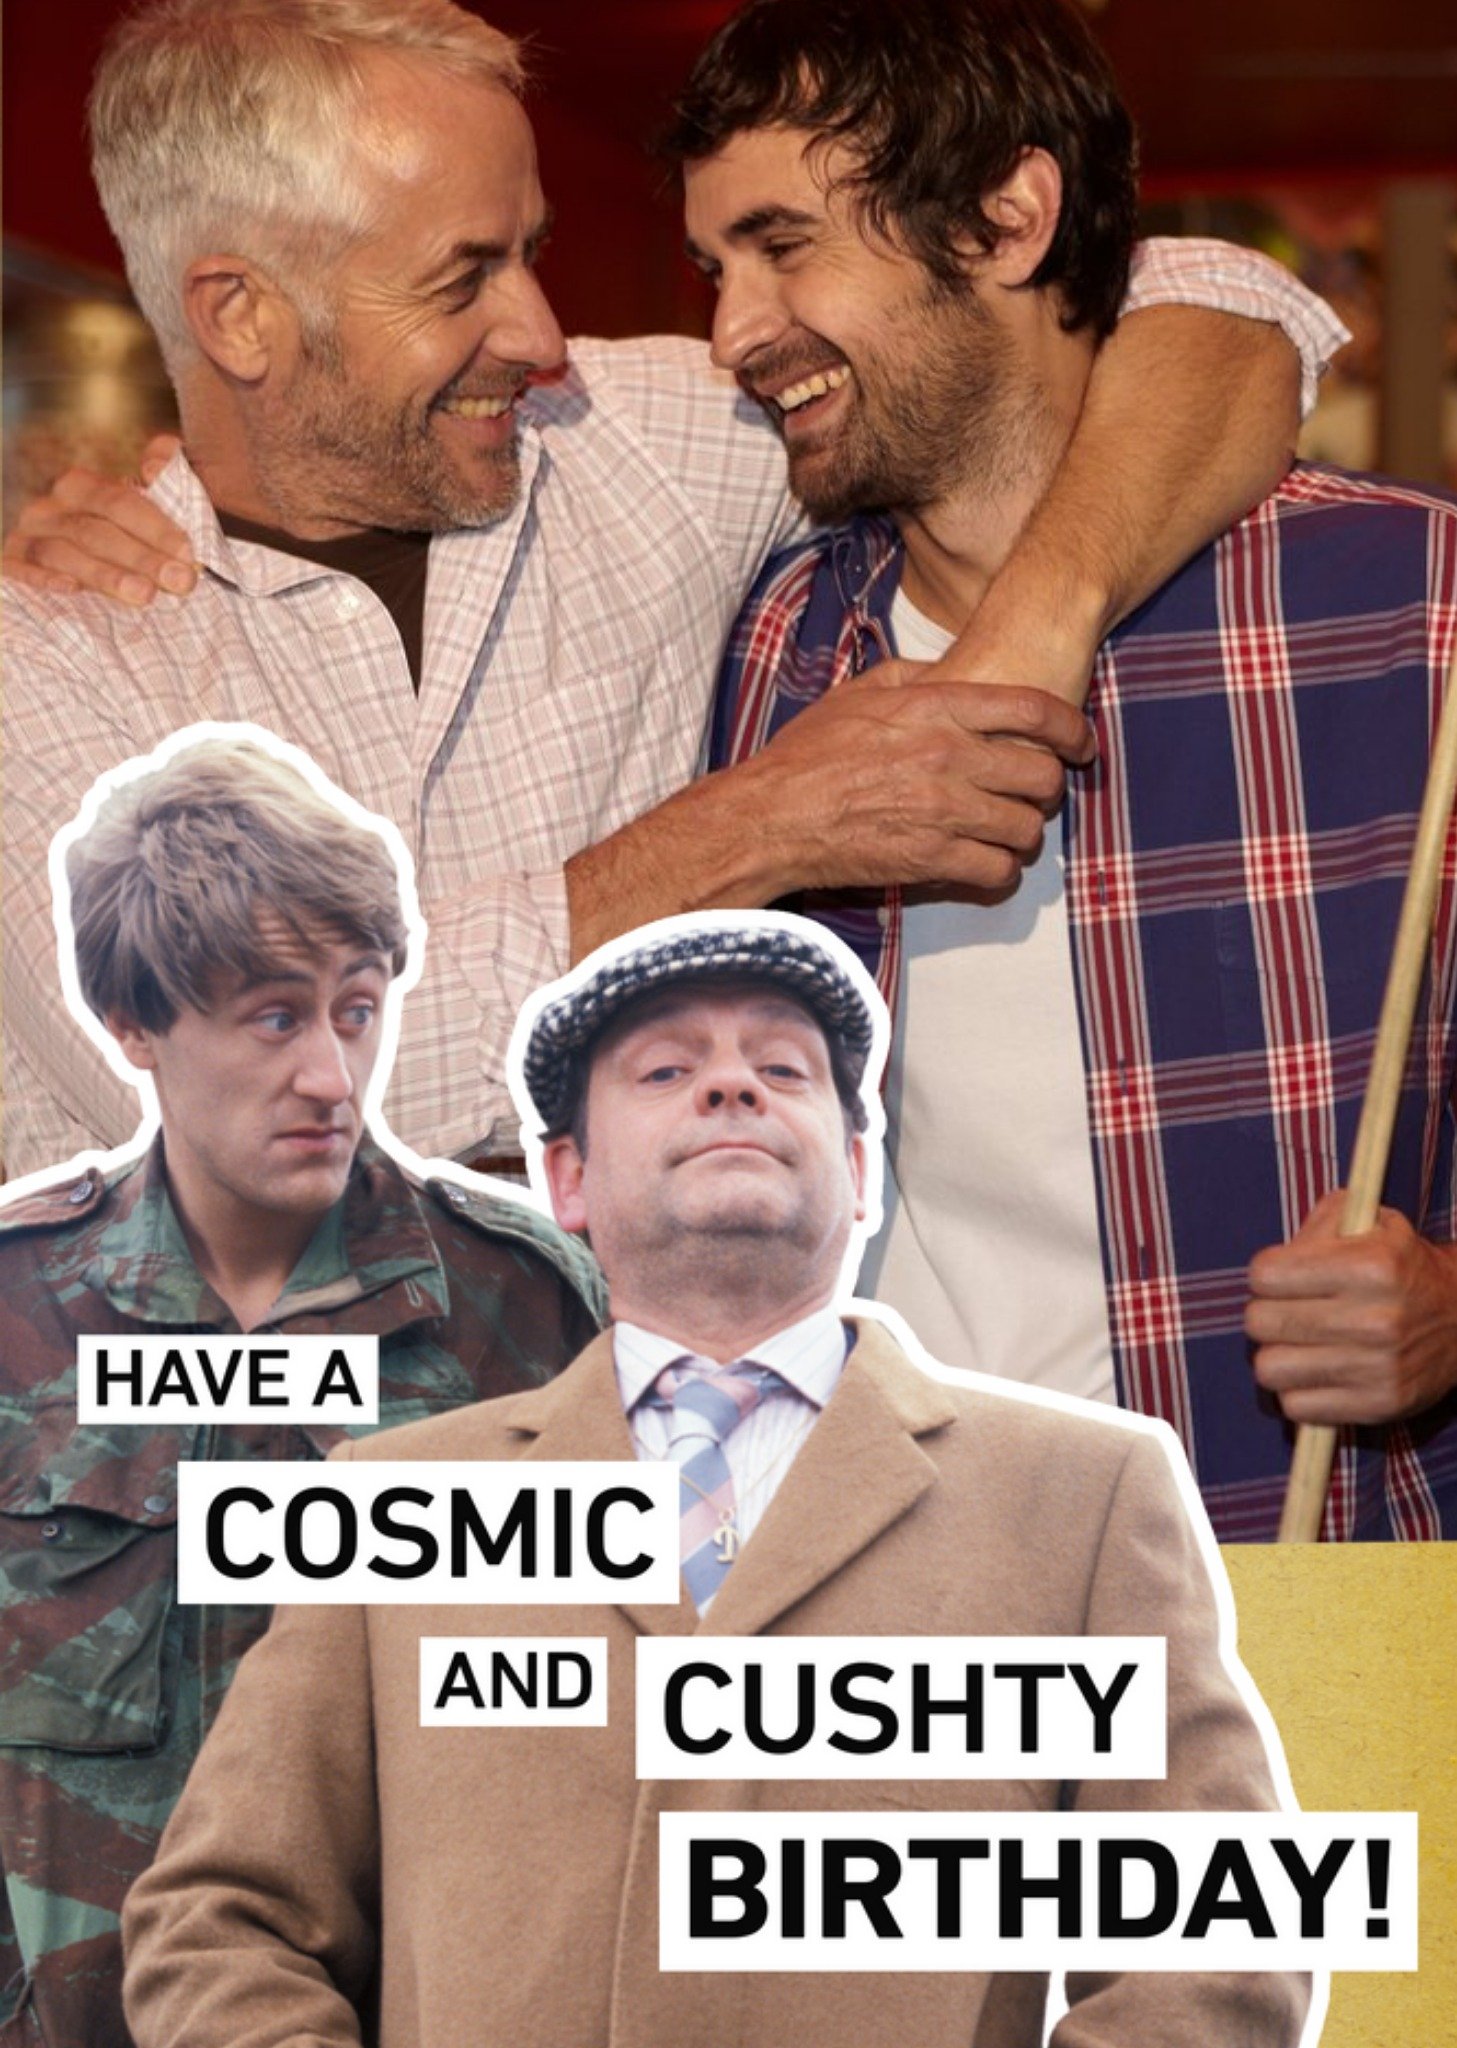 Only Fools And Horses Photo Upload Cushty Birthday Card, Large